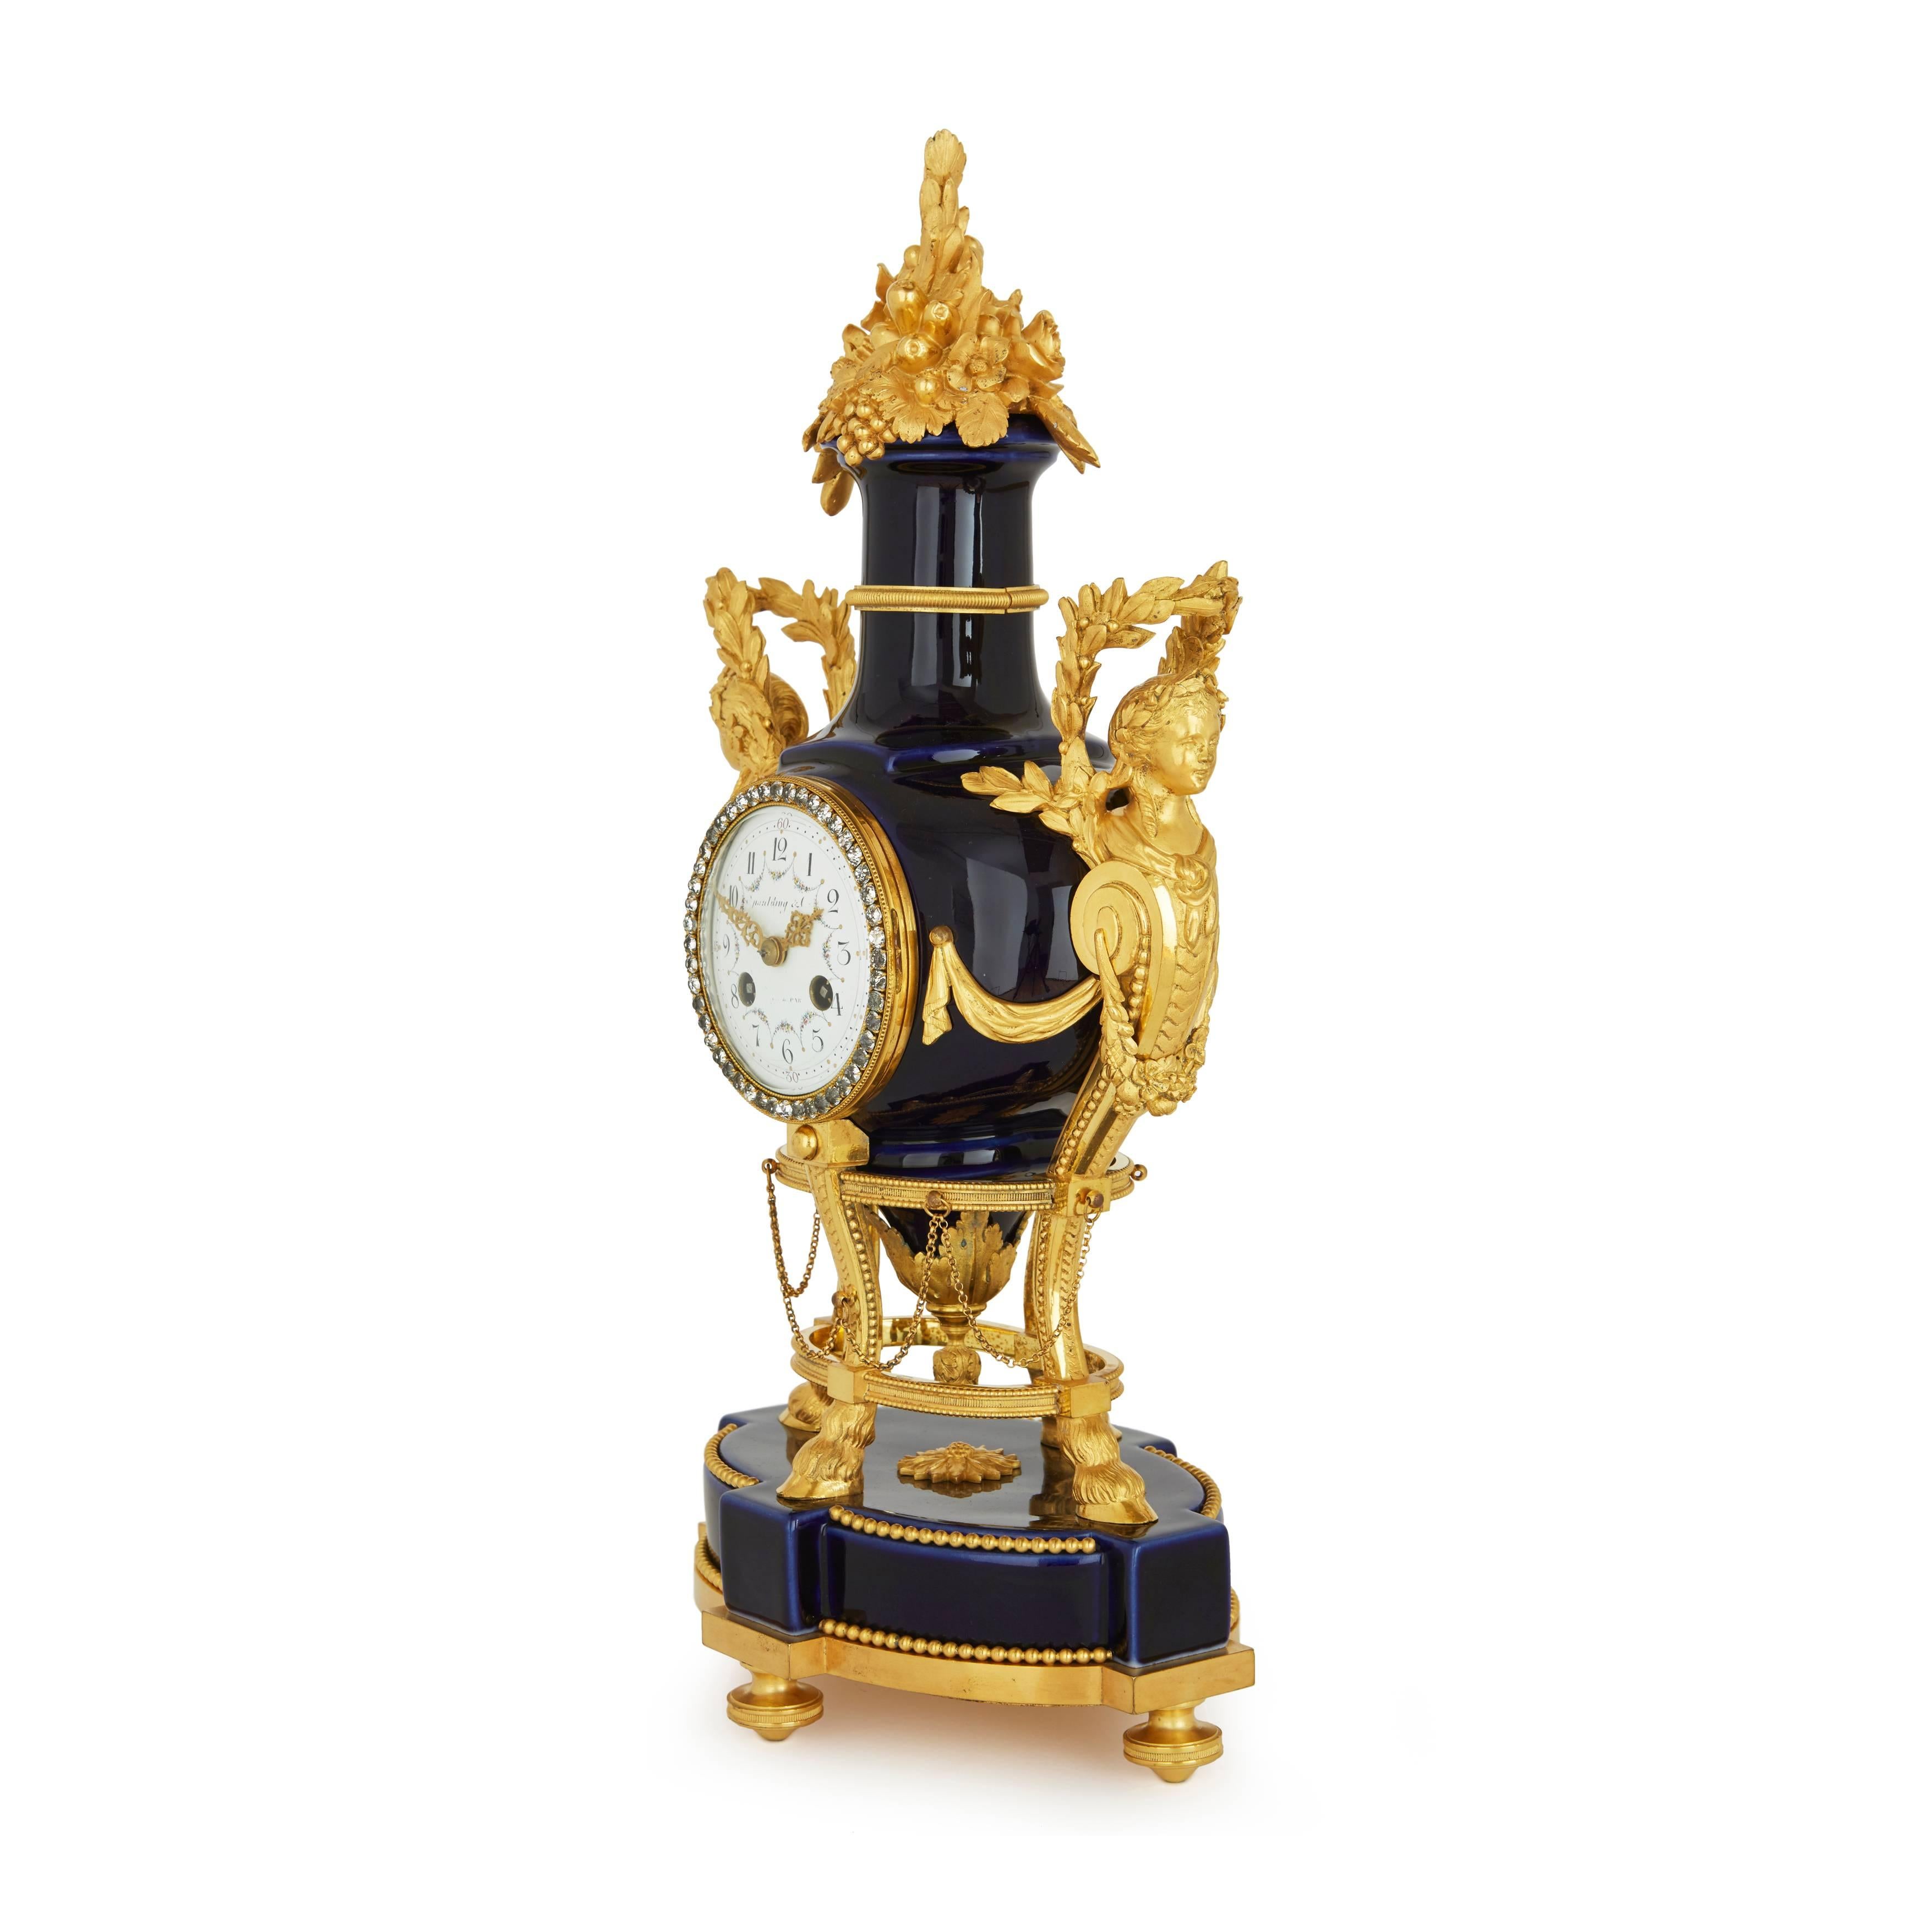 Comprising a central clock and a pair of flanking candelabra, the clock with central circular enamel dial with partially rubbed signature 'Spaulding & Co. Chicago & Paris' with a paste-set border, set within a dark blue porcelain case shaped